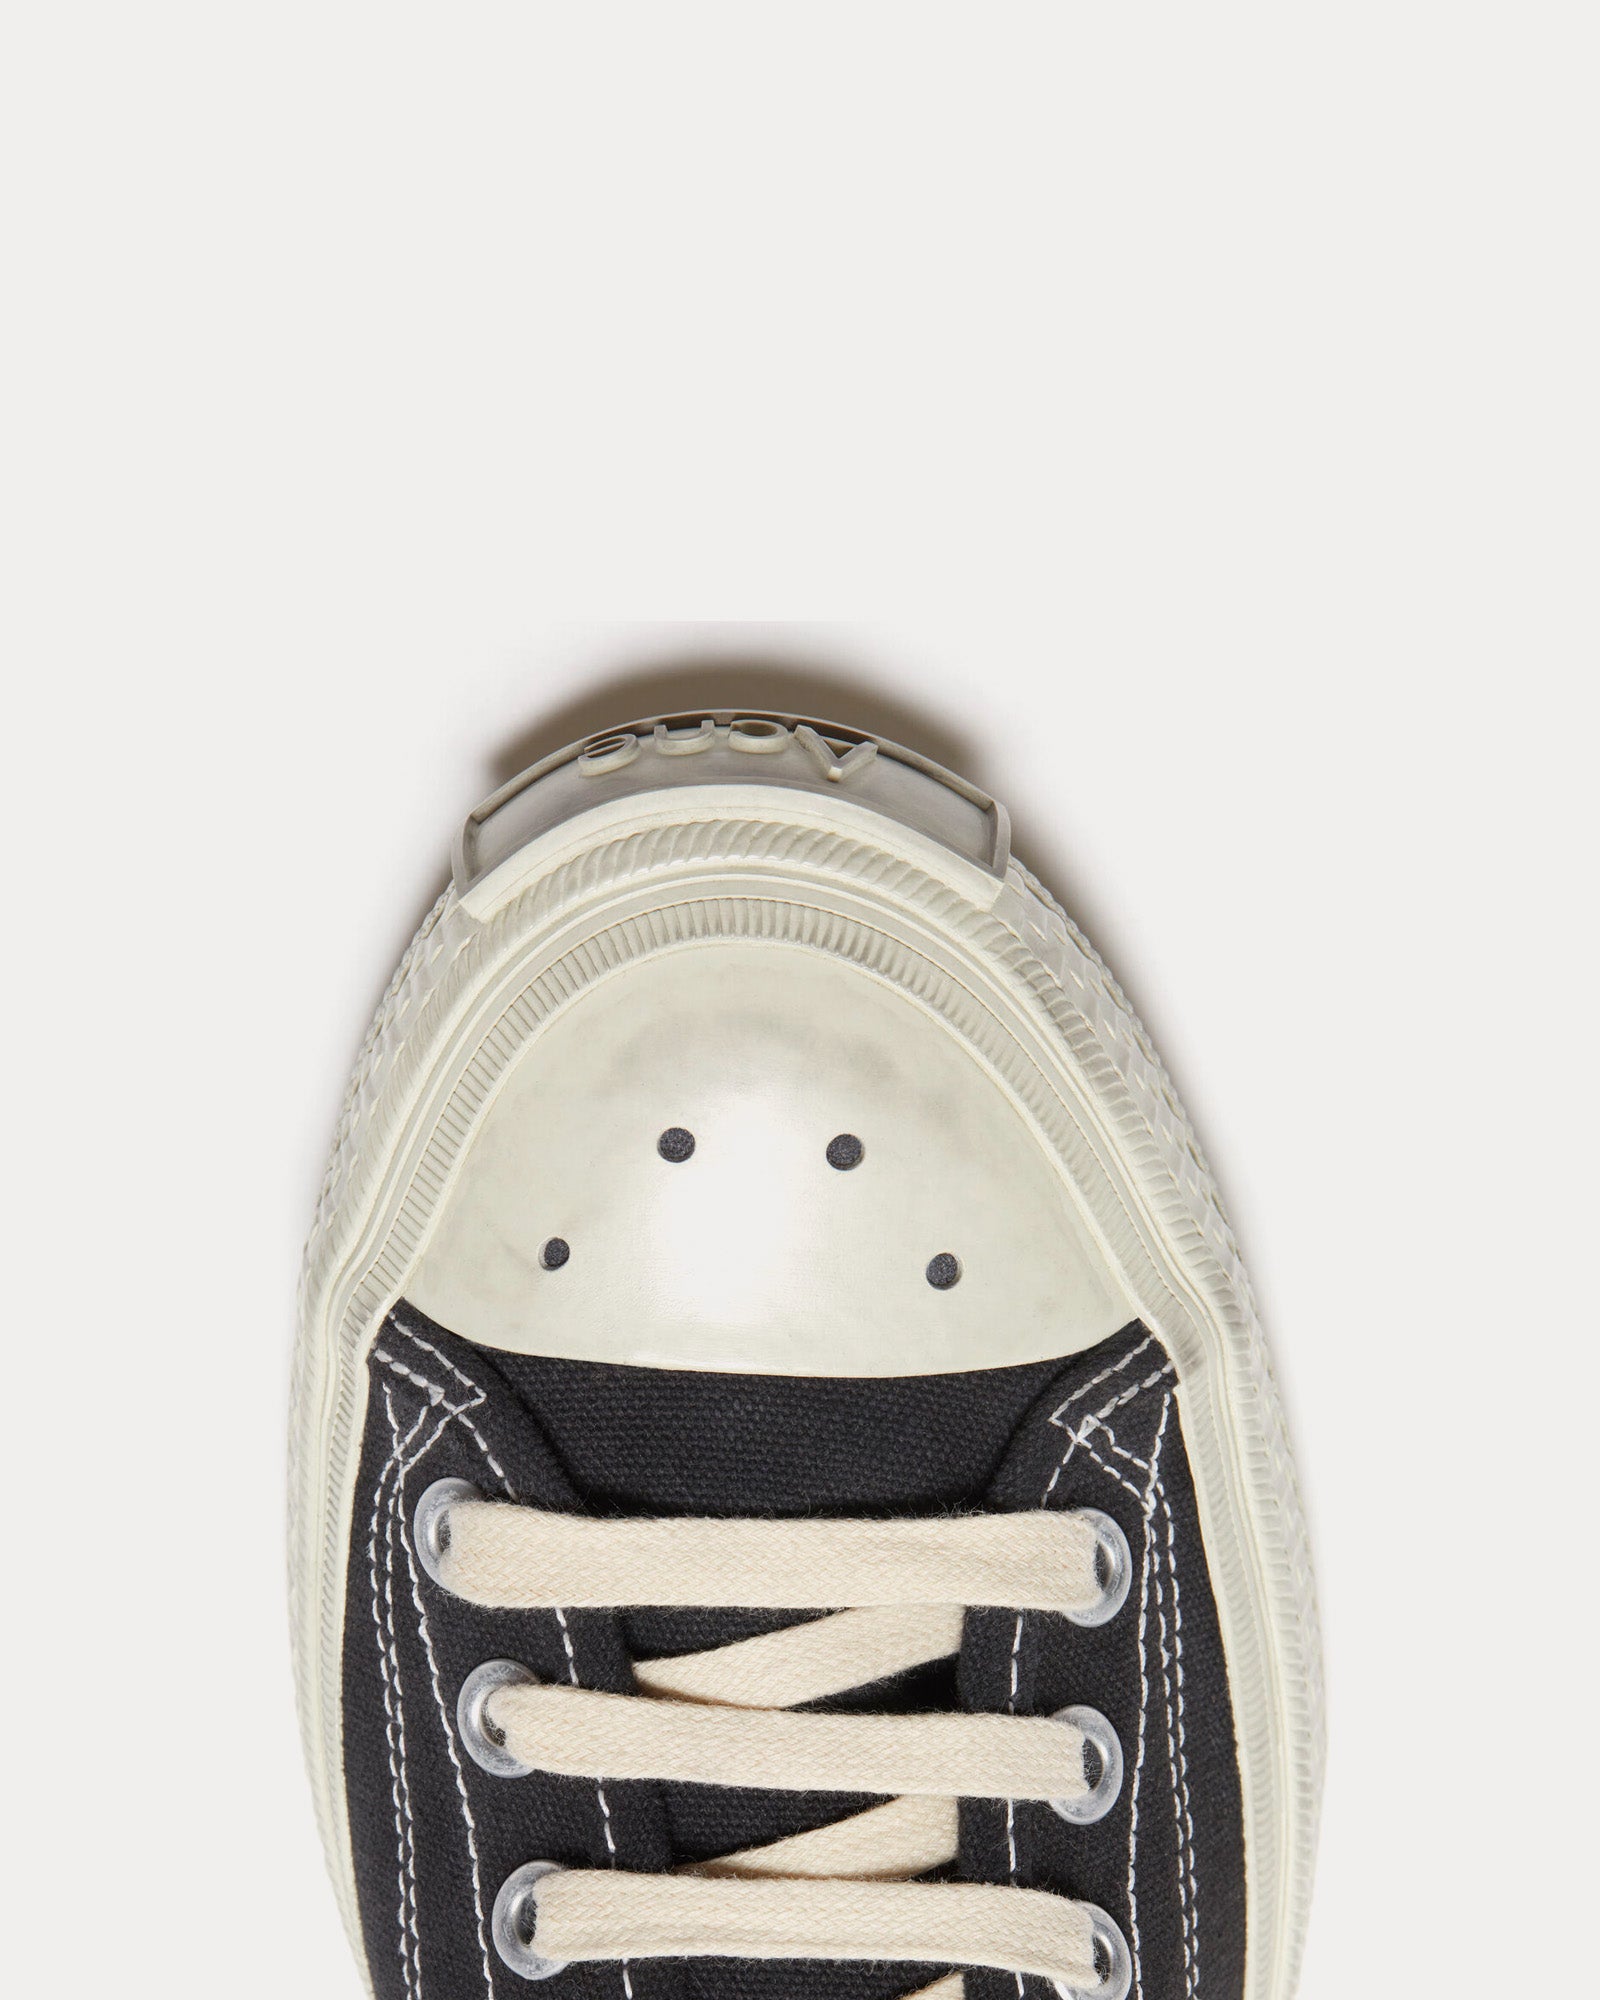 Acne Studios - Ballow Soft Tumbled Black / Off White Low Top Sneakers